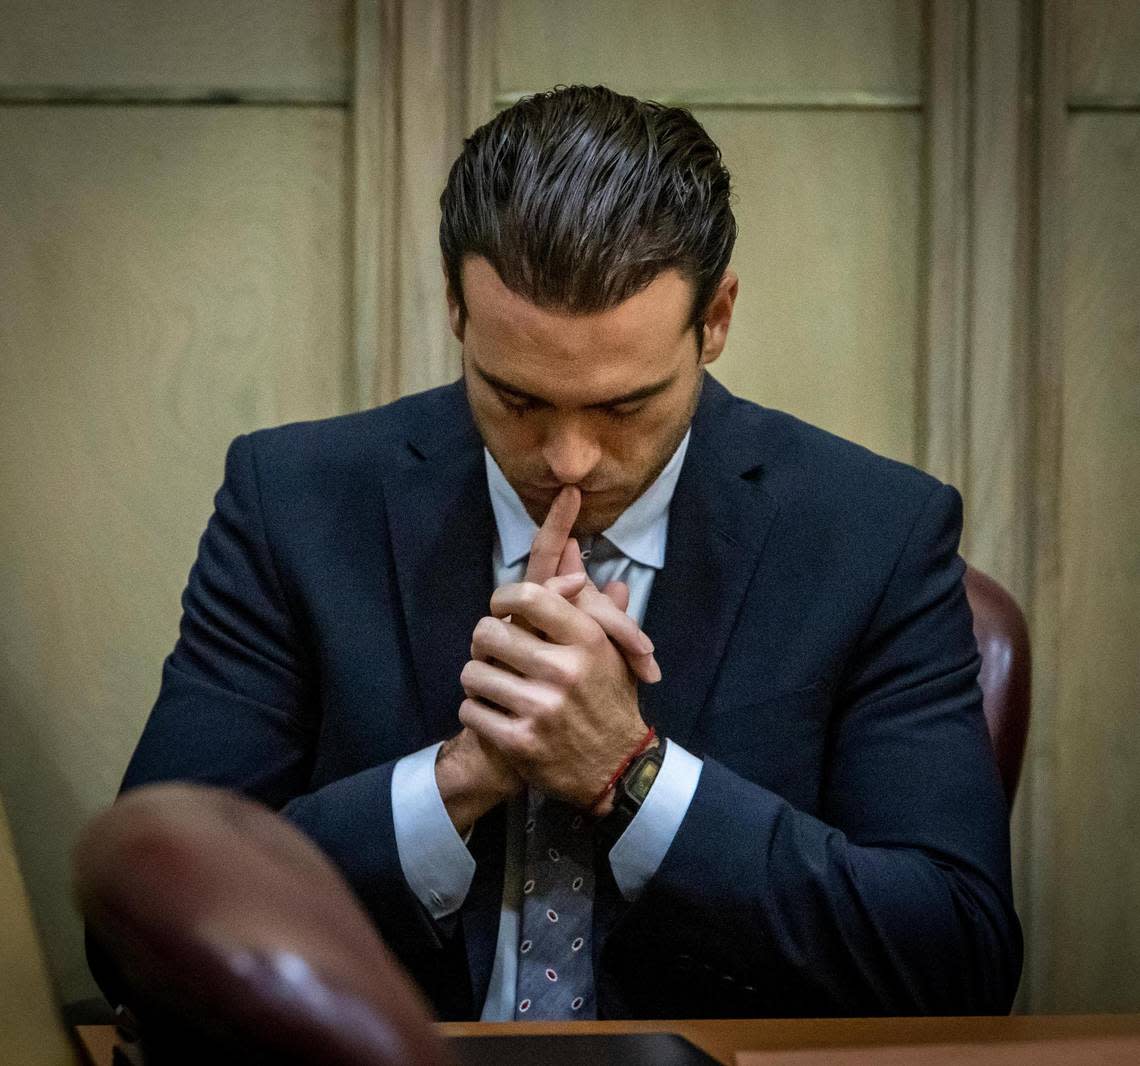 Miami, Florida, September 23, 2022 - Pablo Lyle sits in the courtroom on the first day of his criminal trial in Miami-Dade Criminal court. Pablo Lyle is accused of killing 63-year-old Juan Ricardo Hernandez during a road rage incident in 2019.